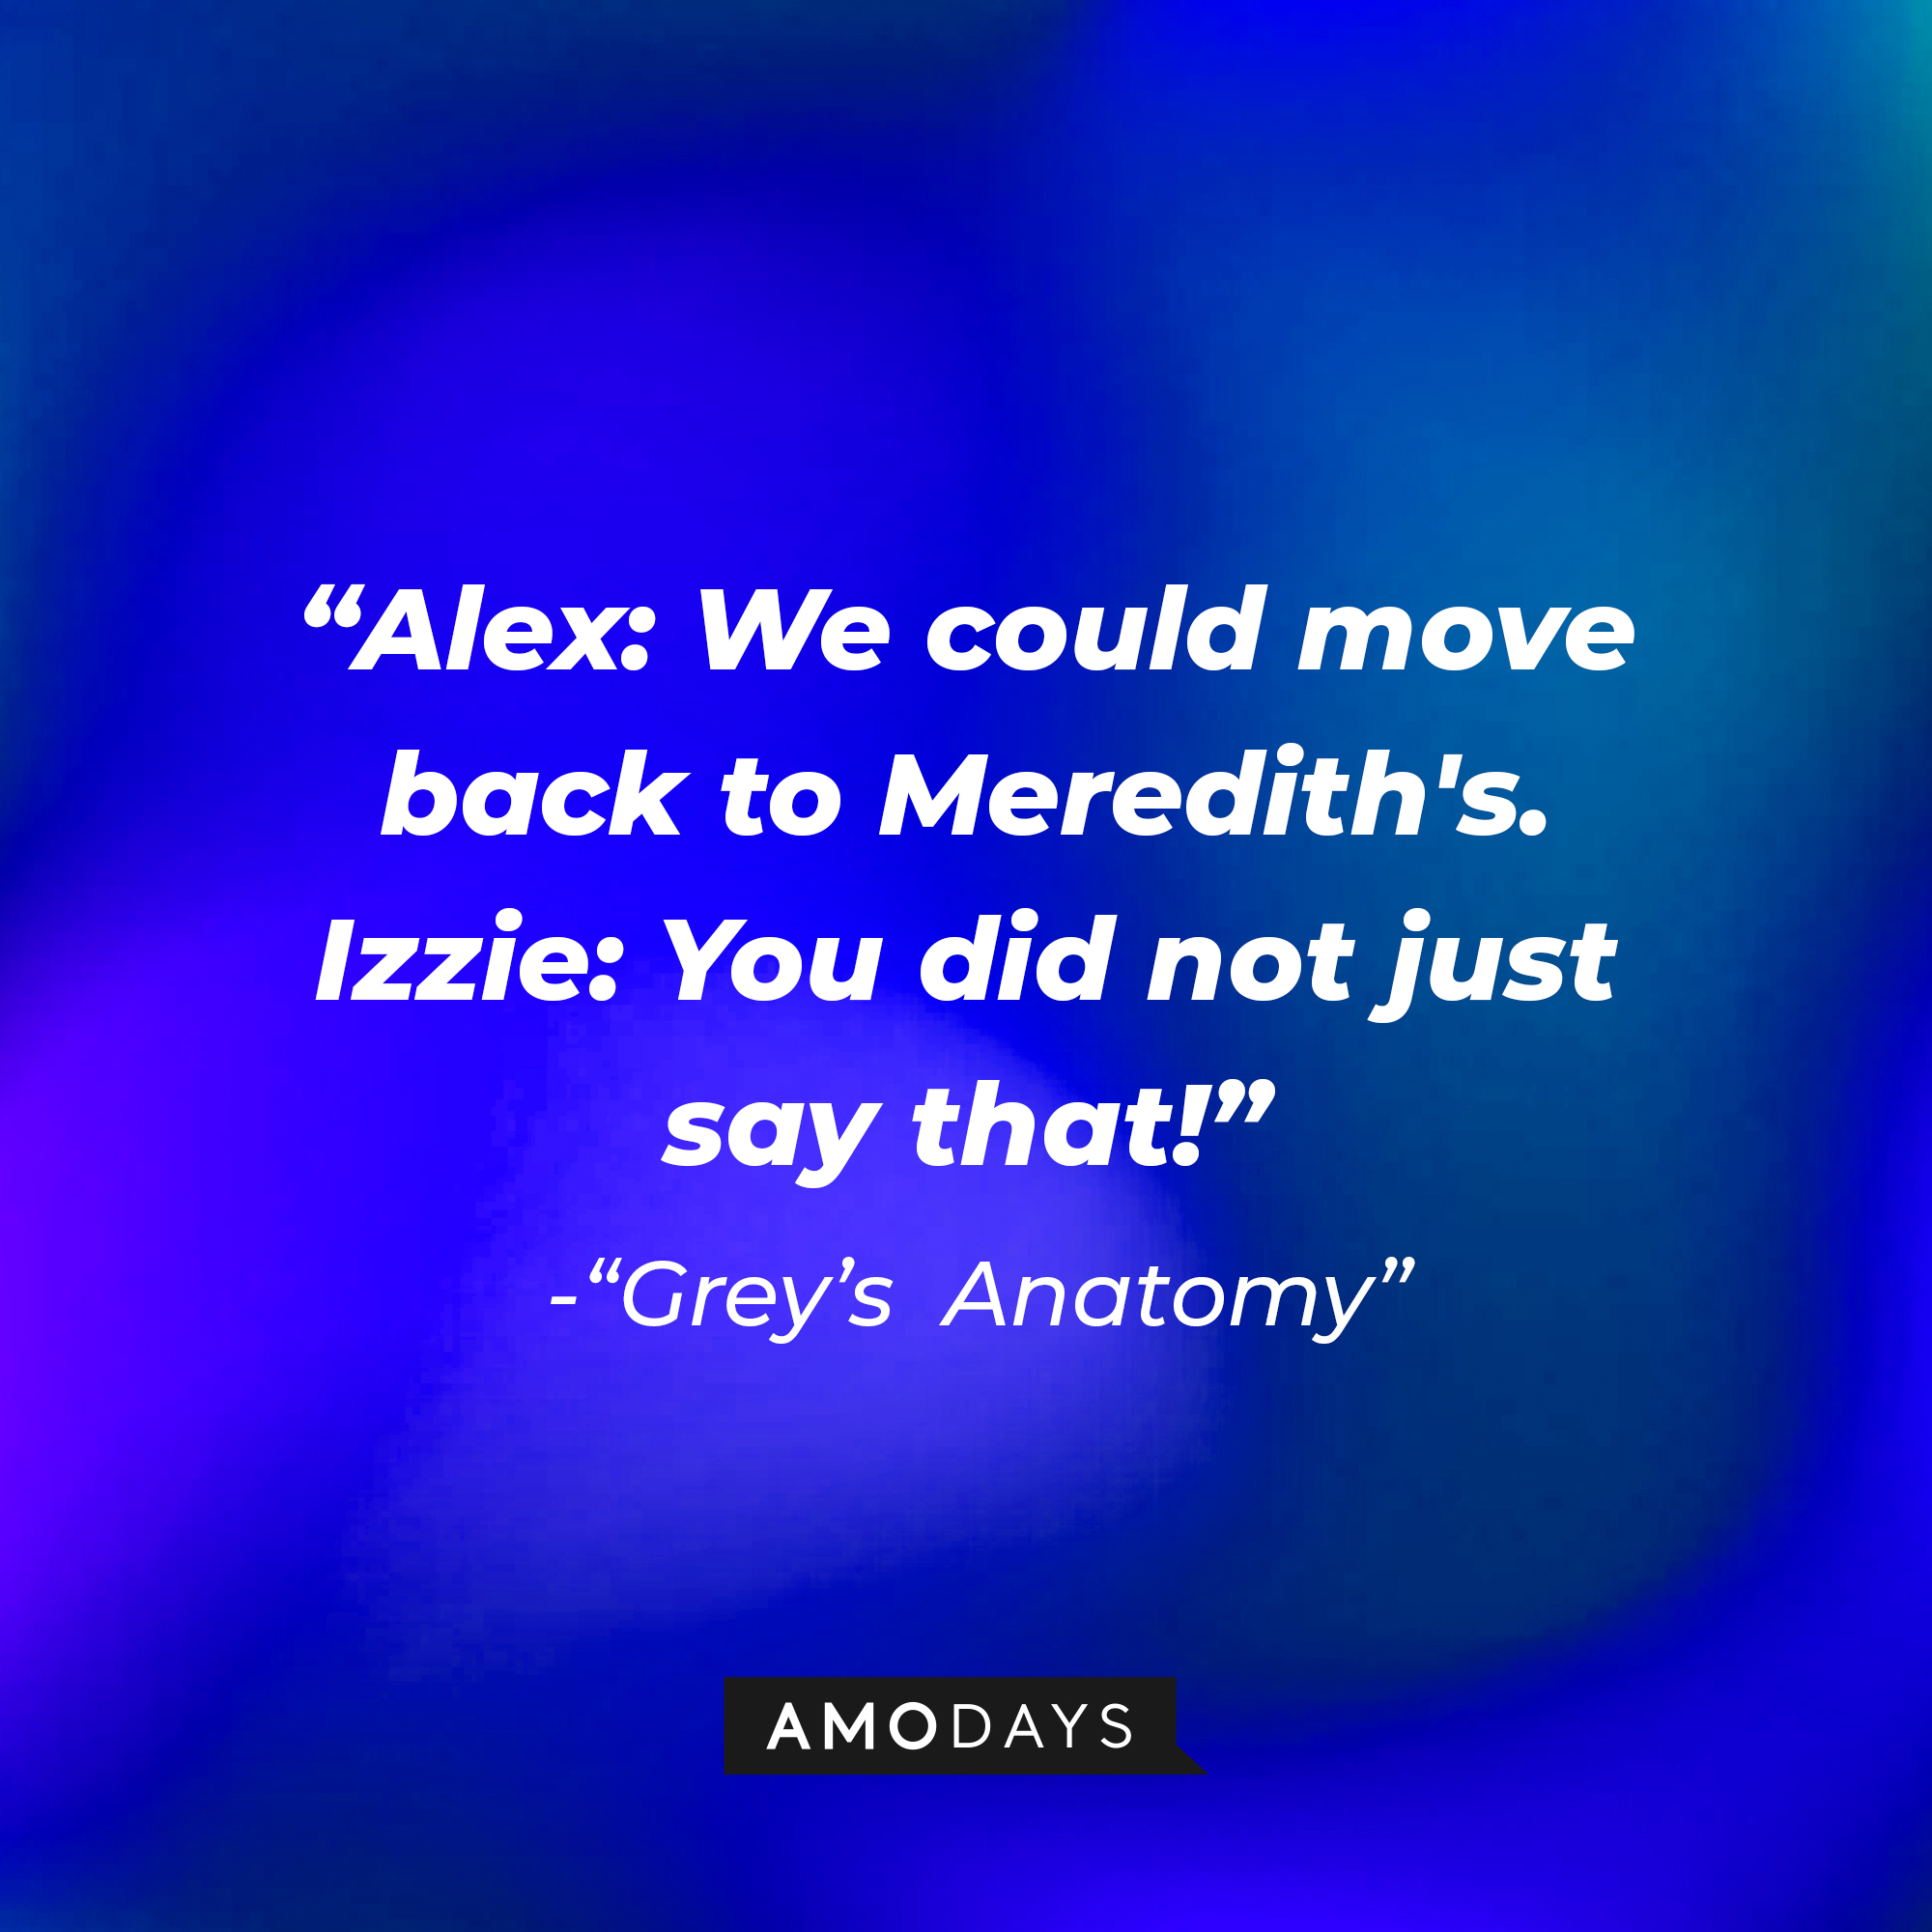 Alex's quote: "We could move back to Meredith's." Izzie: You did not just say that!" | Image: Amodays